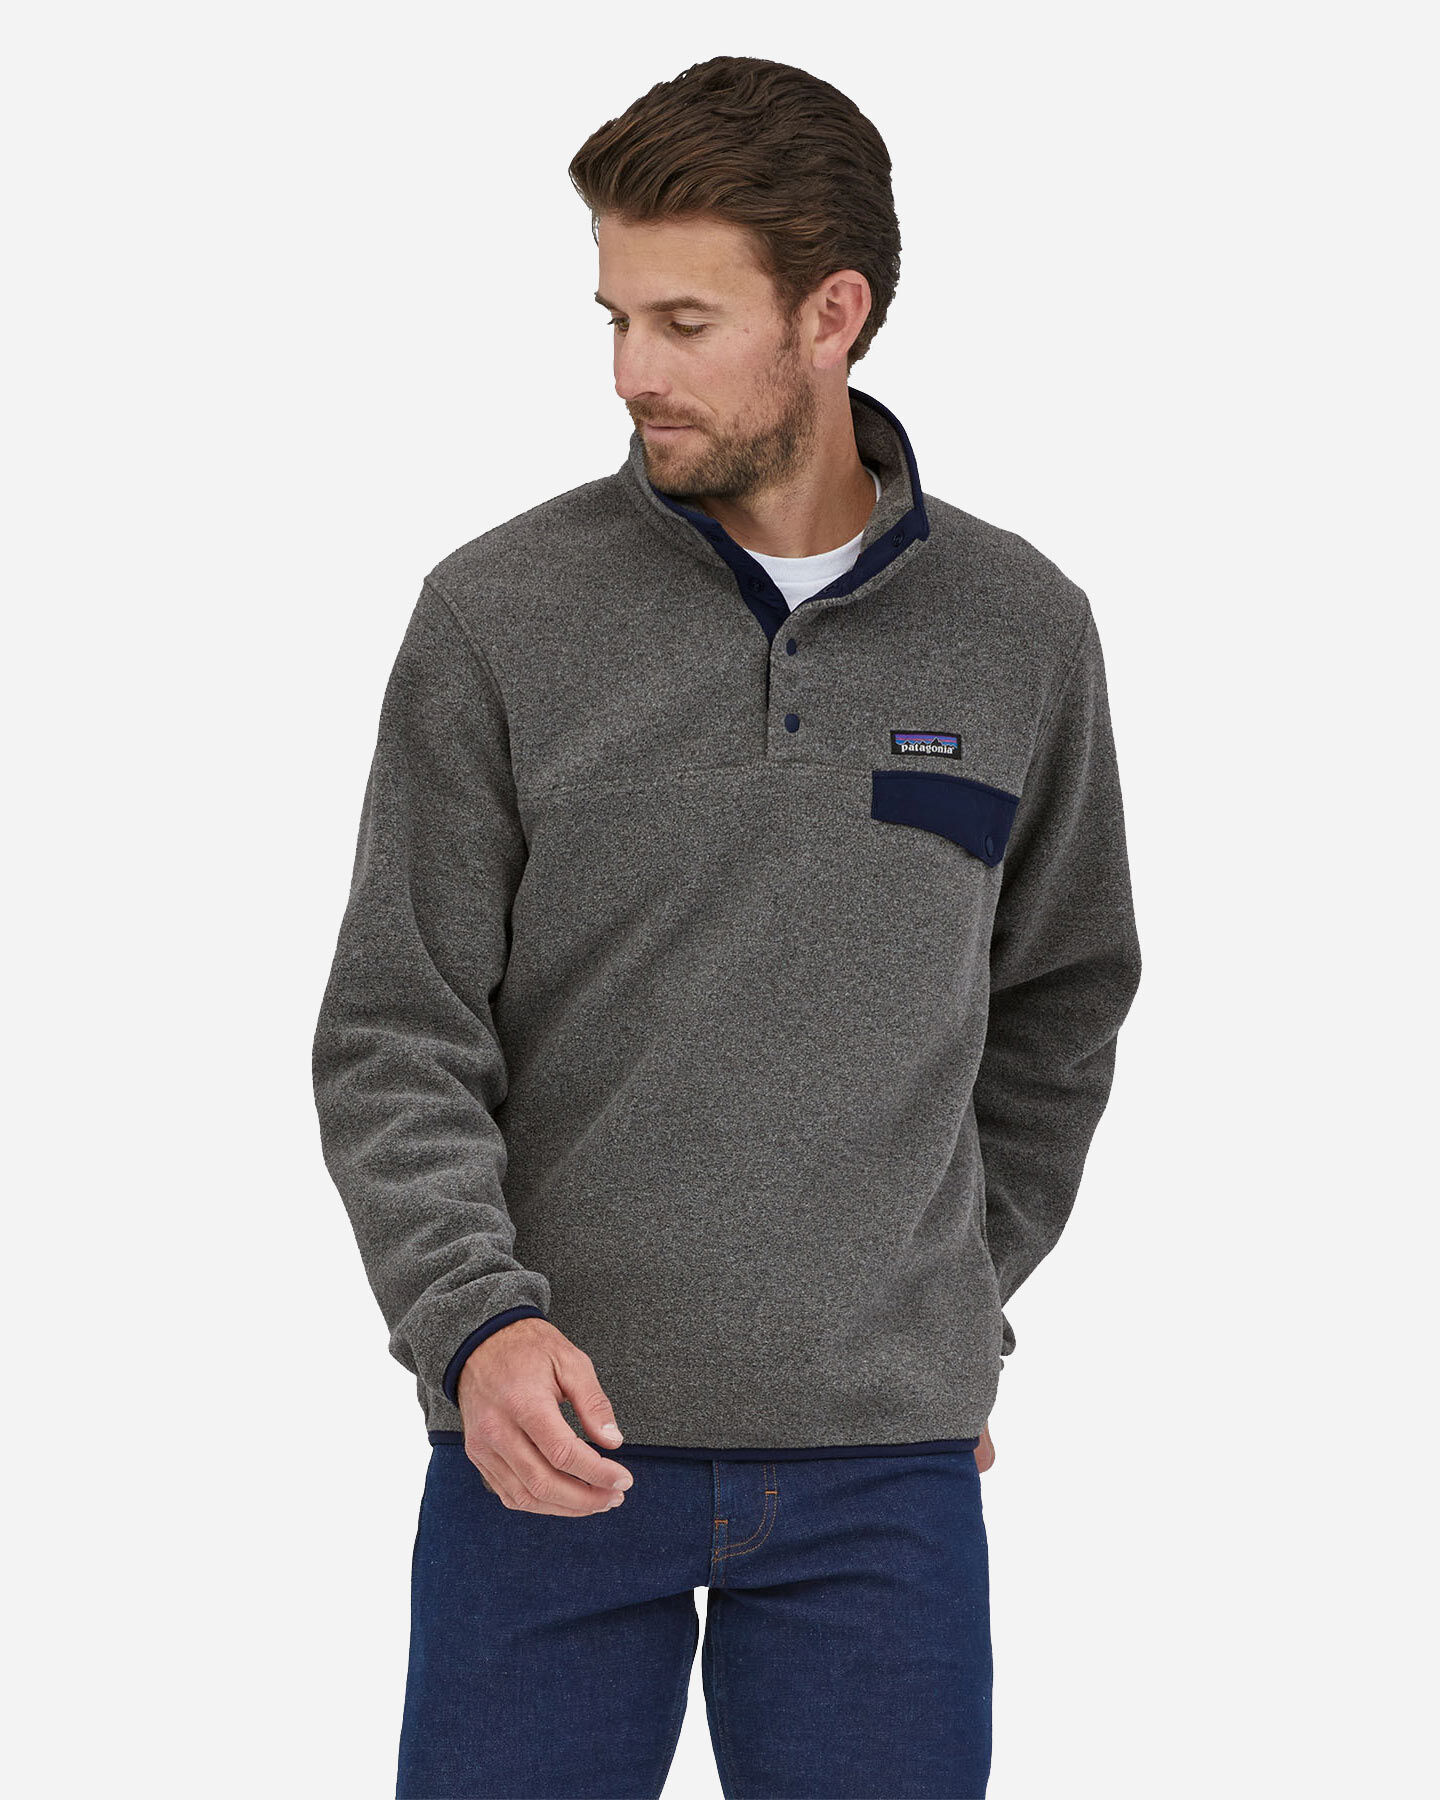  Pile PATAGONIA LIGHTWEIGHT SYNCHILLA M S5496098 scatto 1